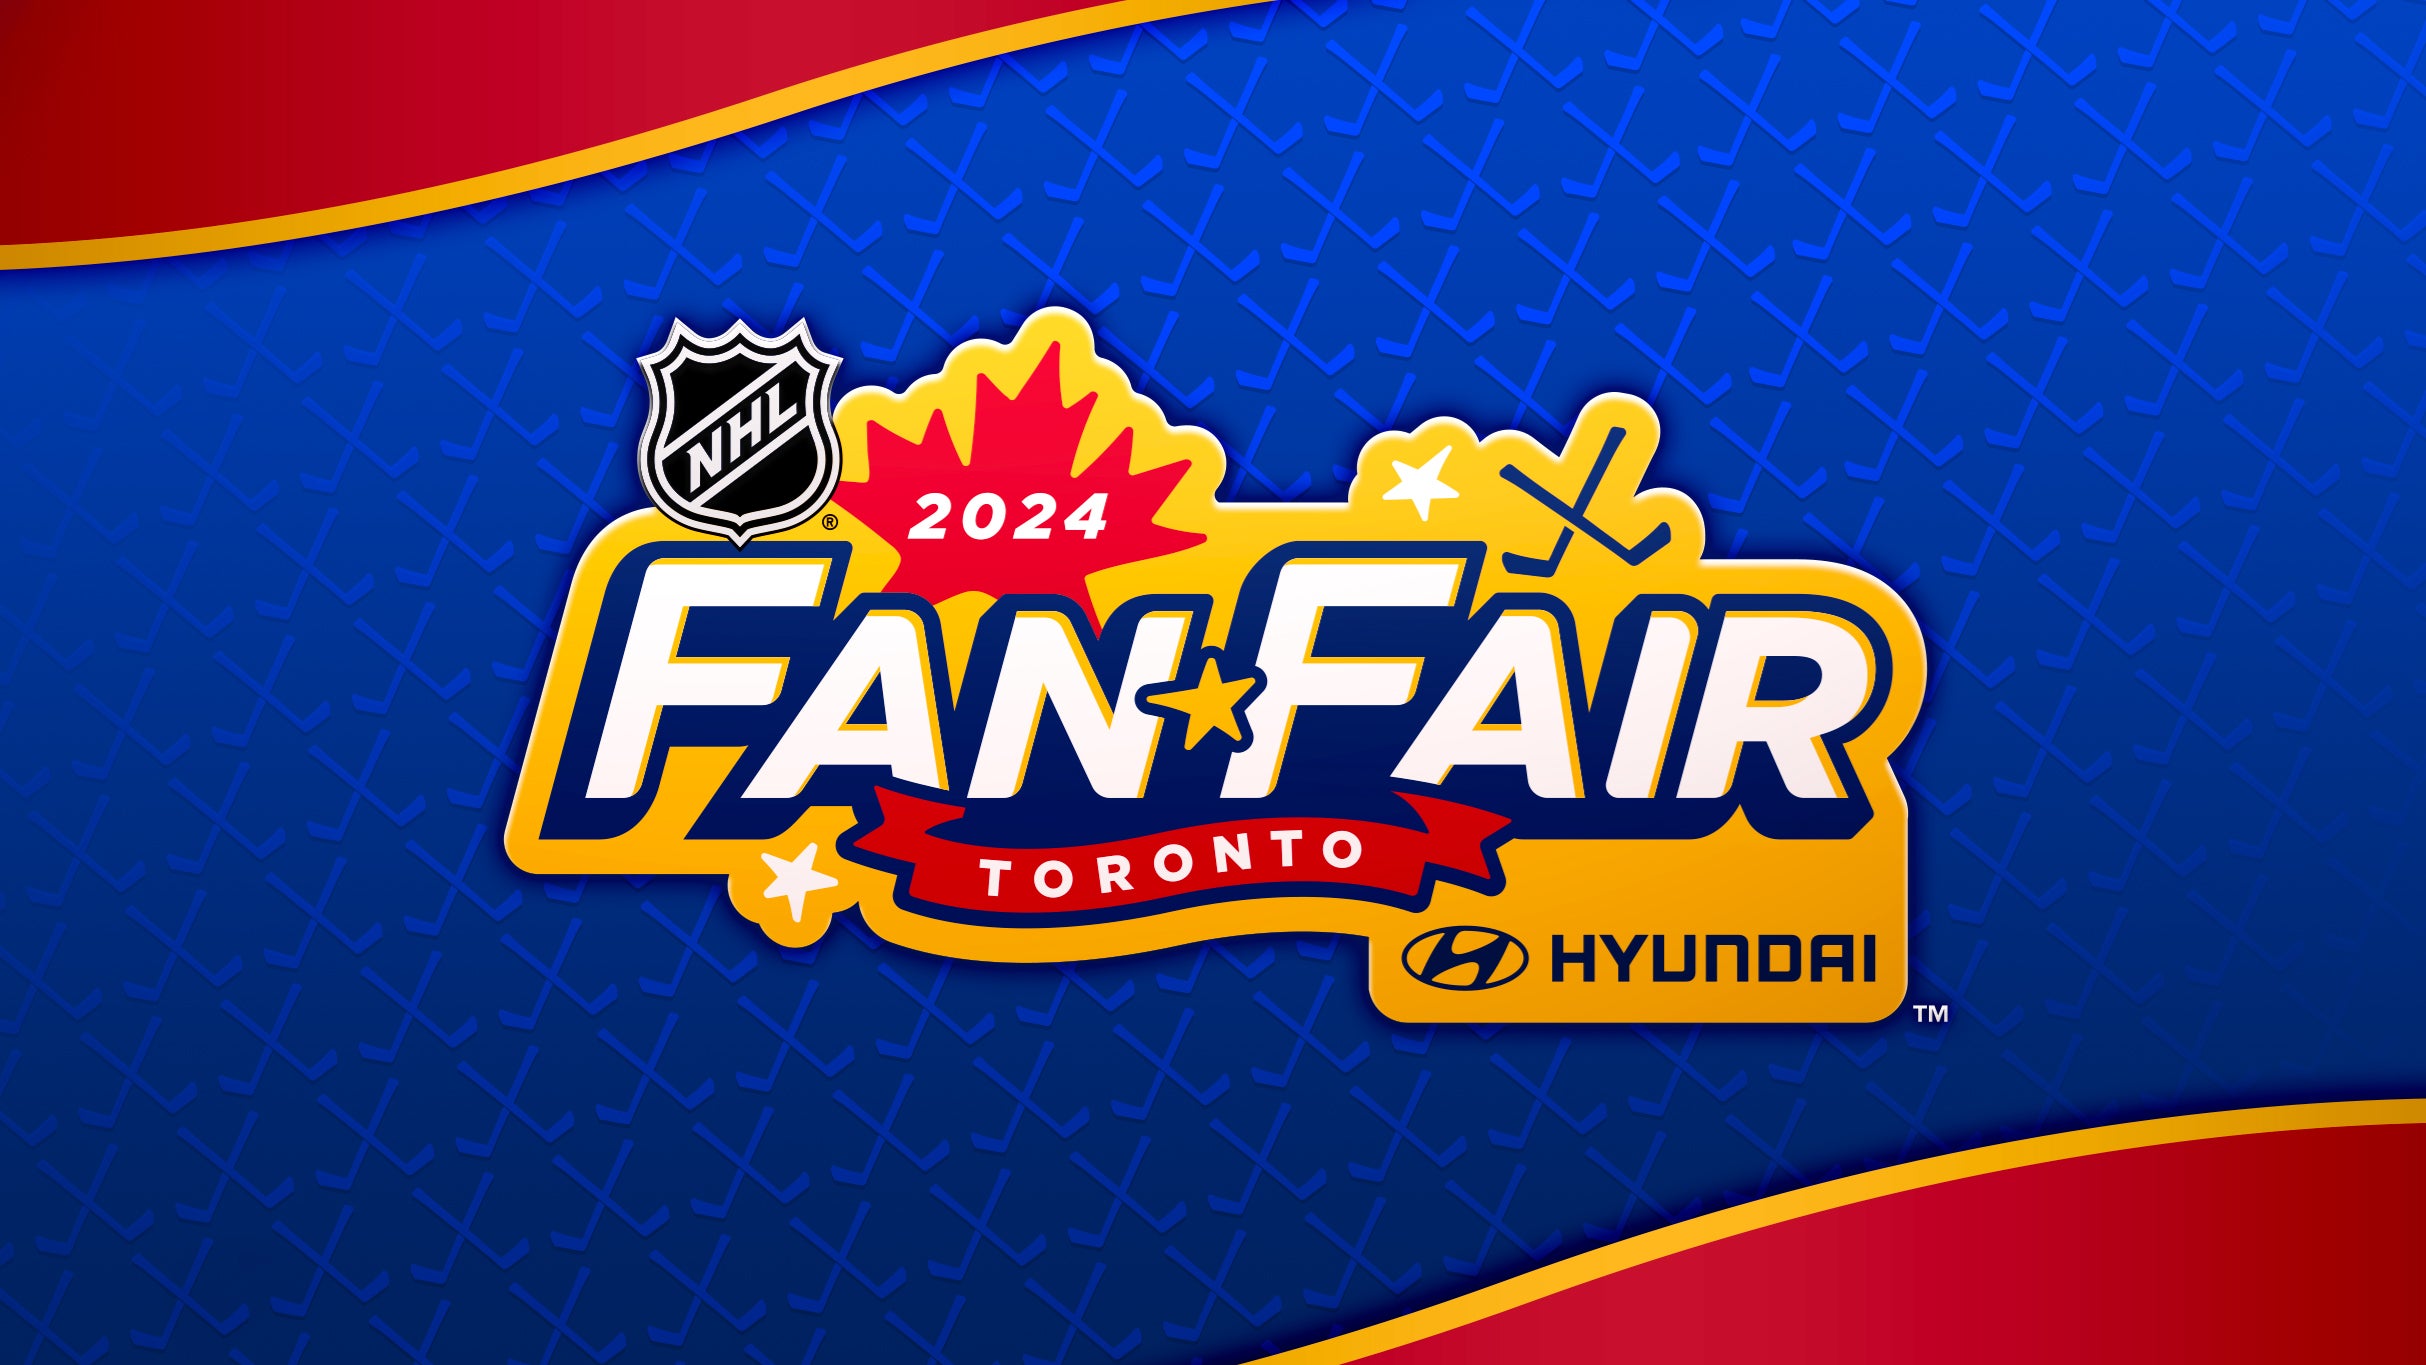 2024 Hyundai NHL Fan Fair - Thursday 2:00 PM - 9:00 PM in Toronto promo photo for Scotiabank Visa exclusive presale offer code